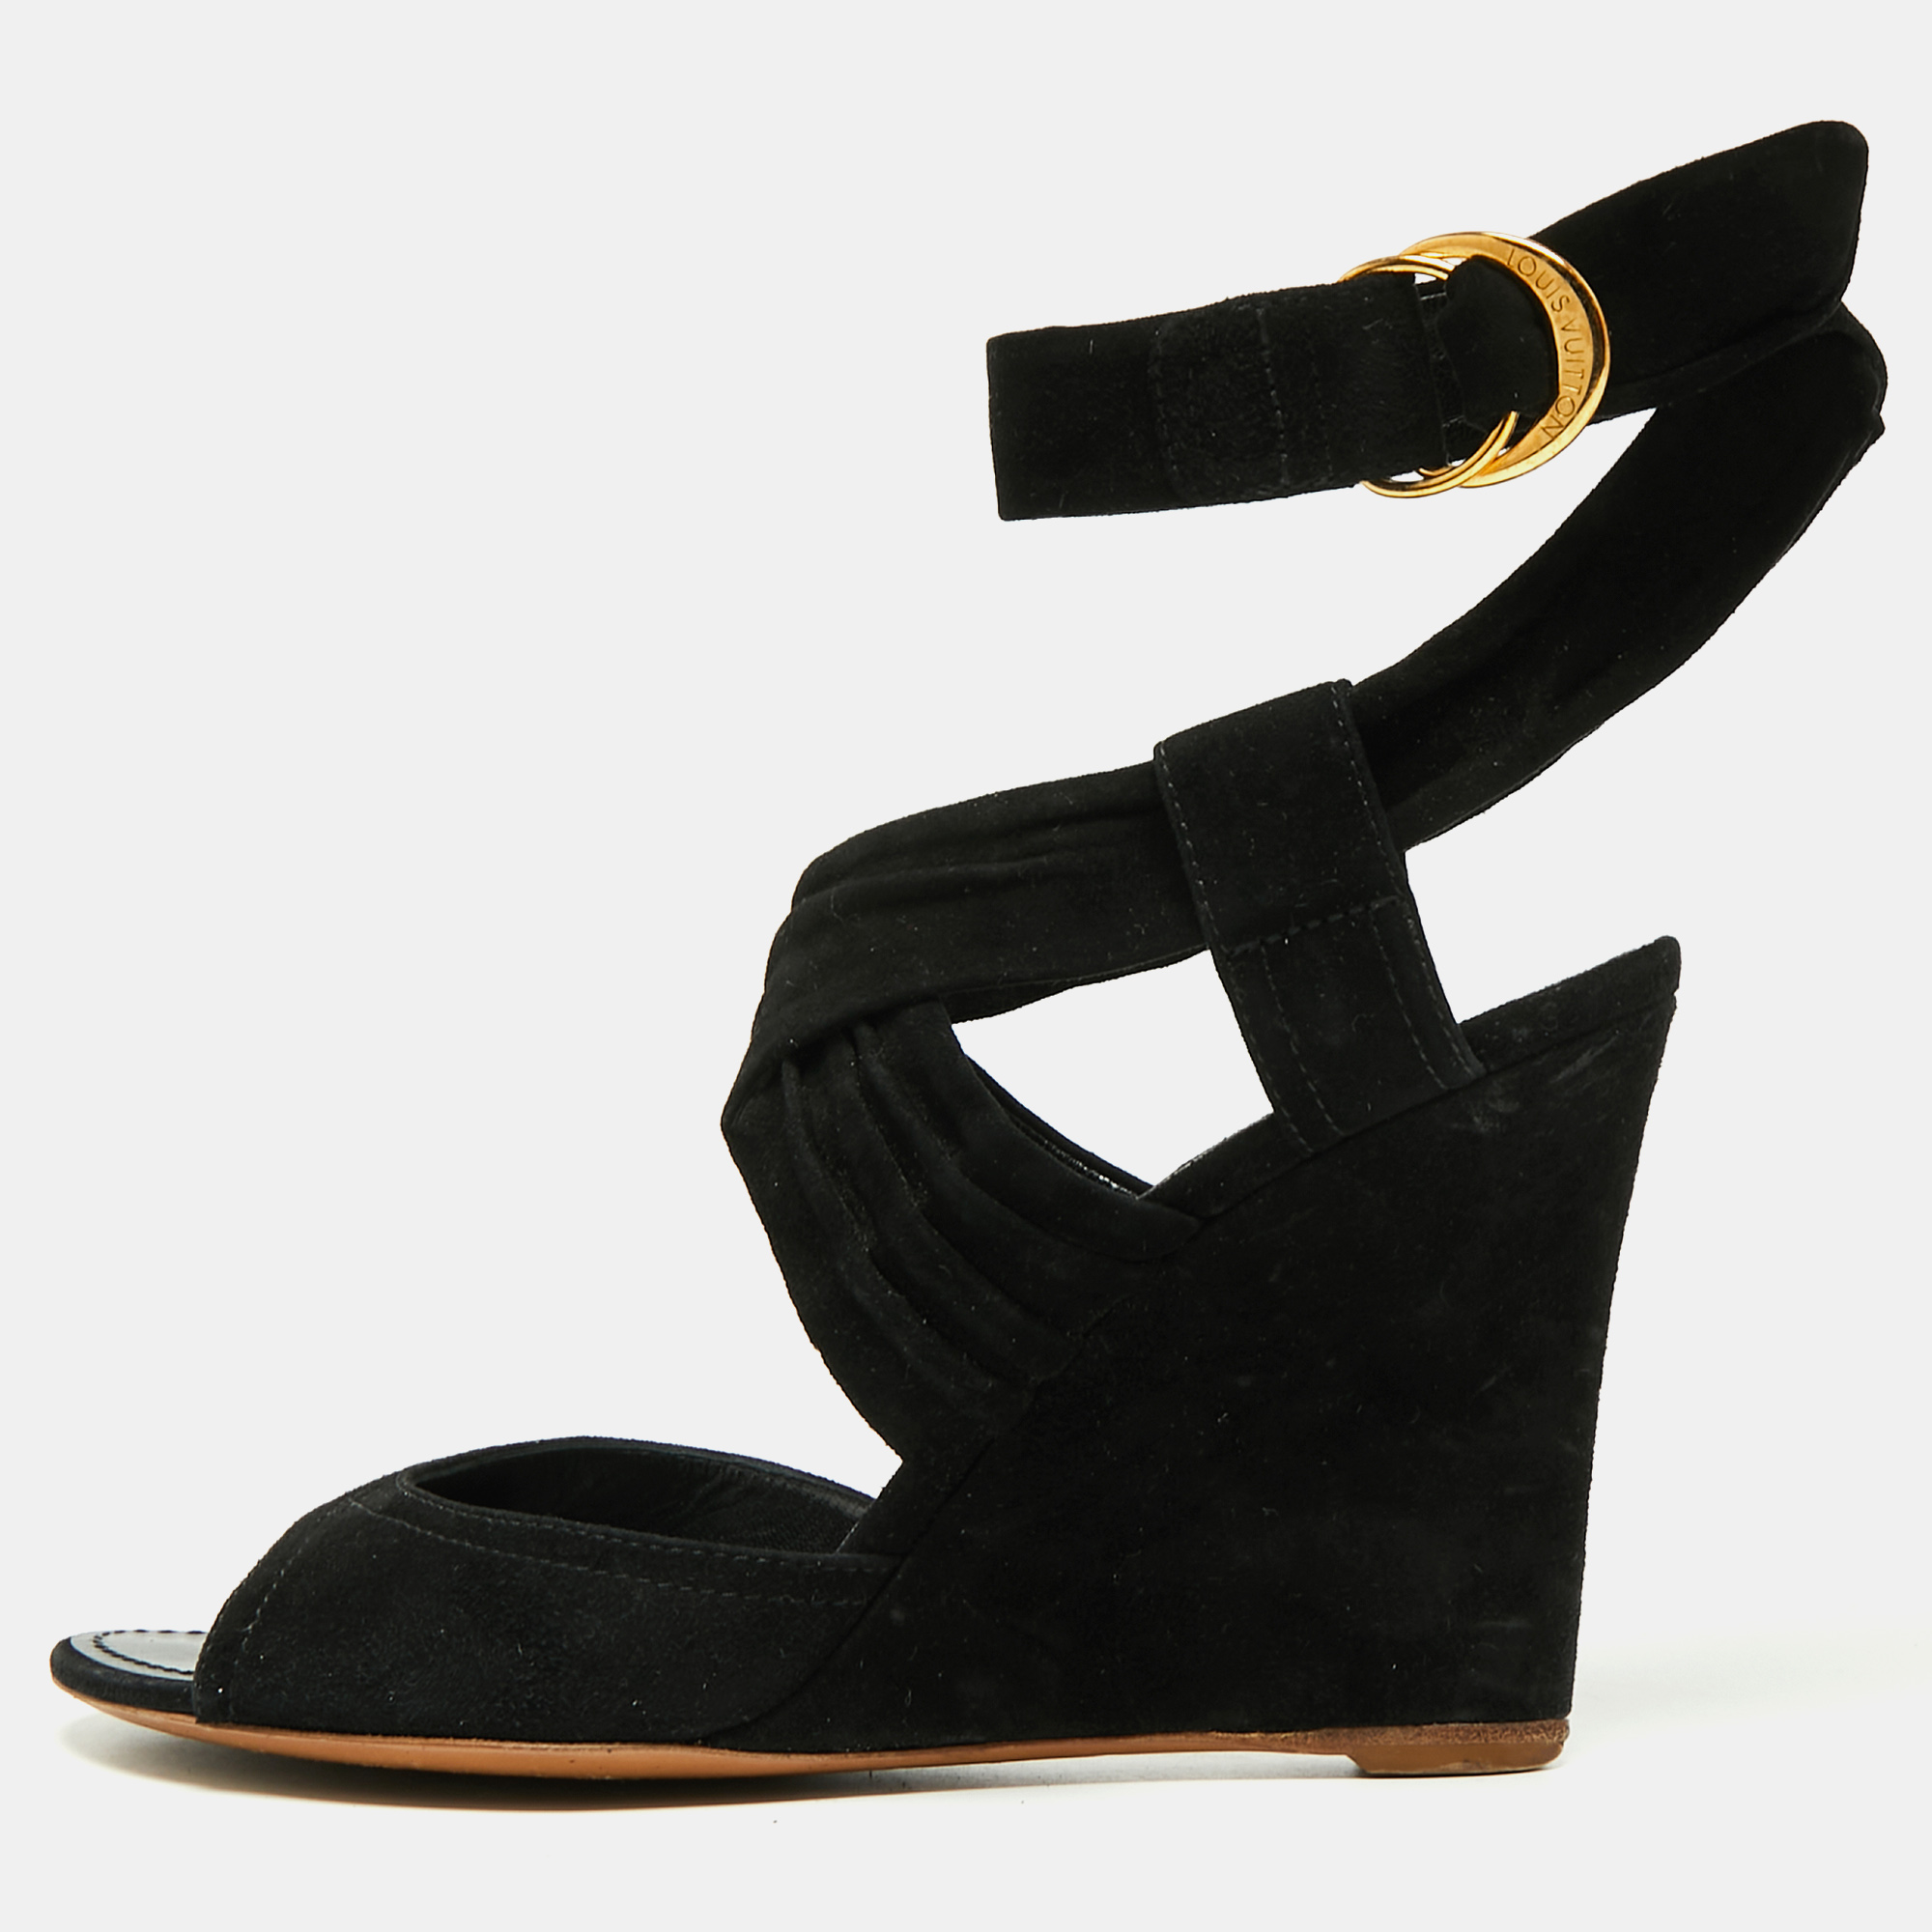 These sandals from Louis Vuitton are beautiful in every way. They are created using black suede on the exterior and show open toes gold toned hardware and an ankle wrap feature. They are elevated on wedge heels.